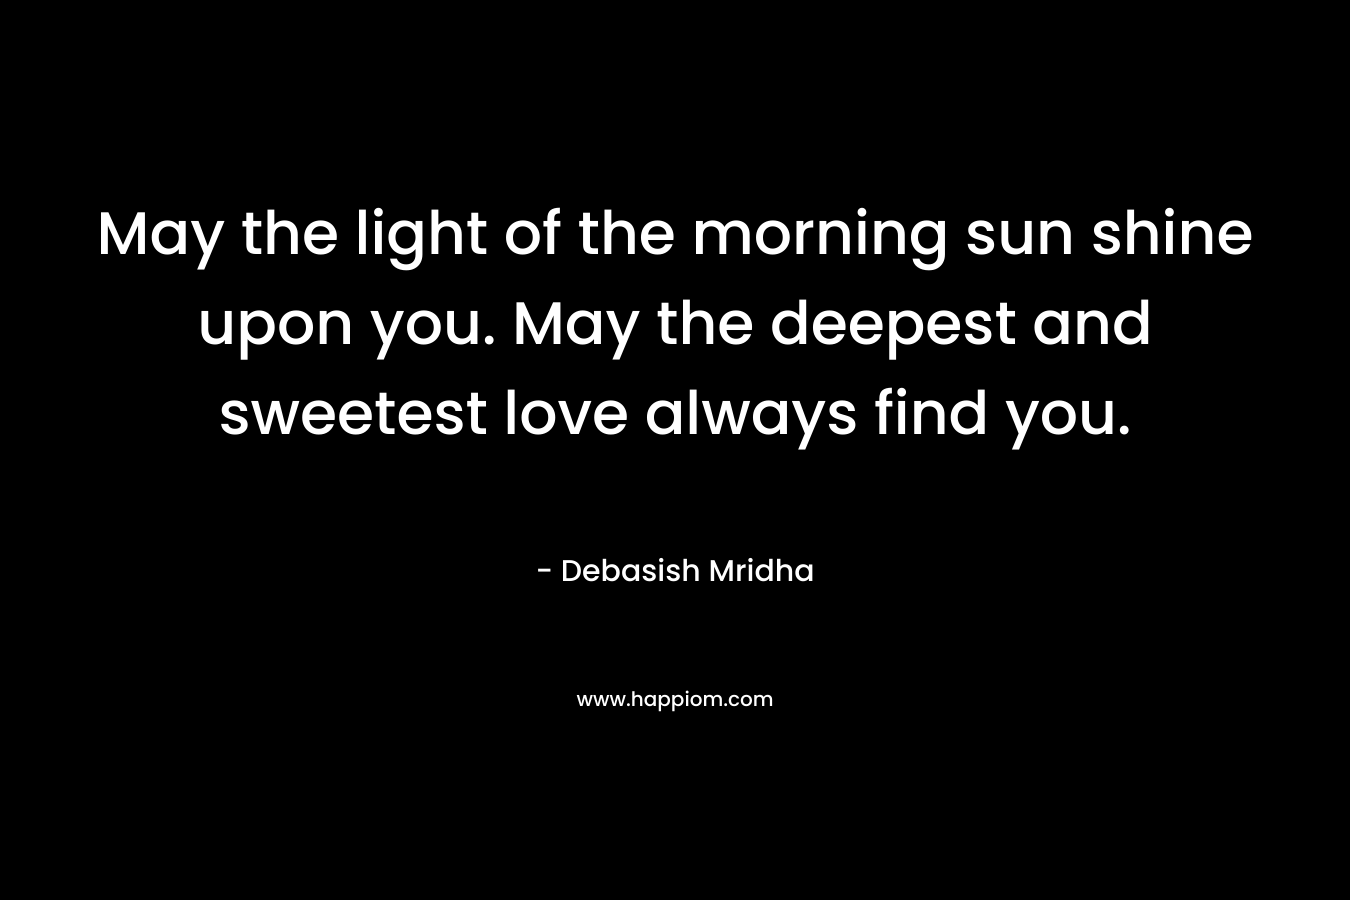 May the light of the morning sun shine upon you. May the deepest and sweetest love always find you.